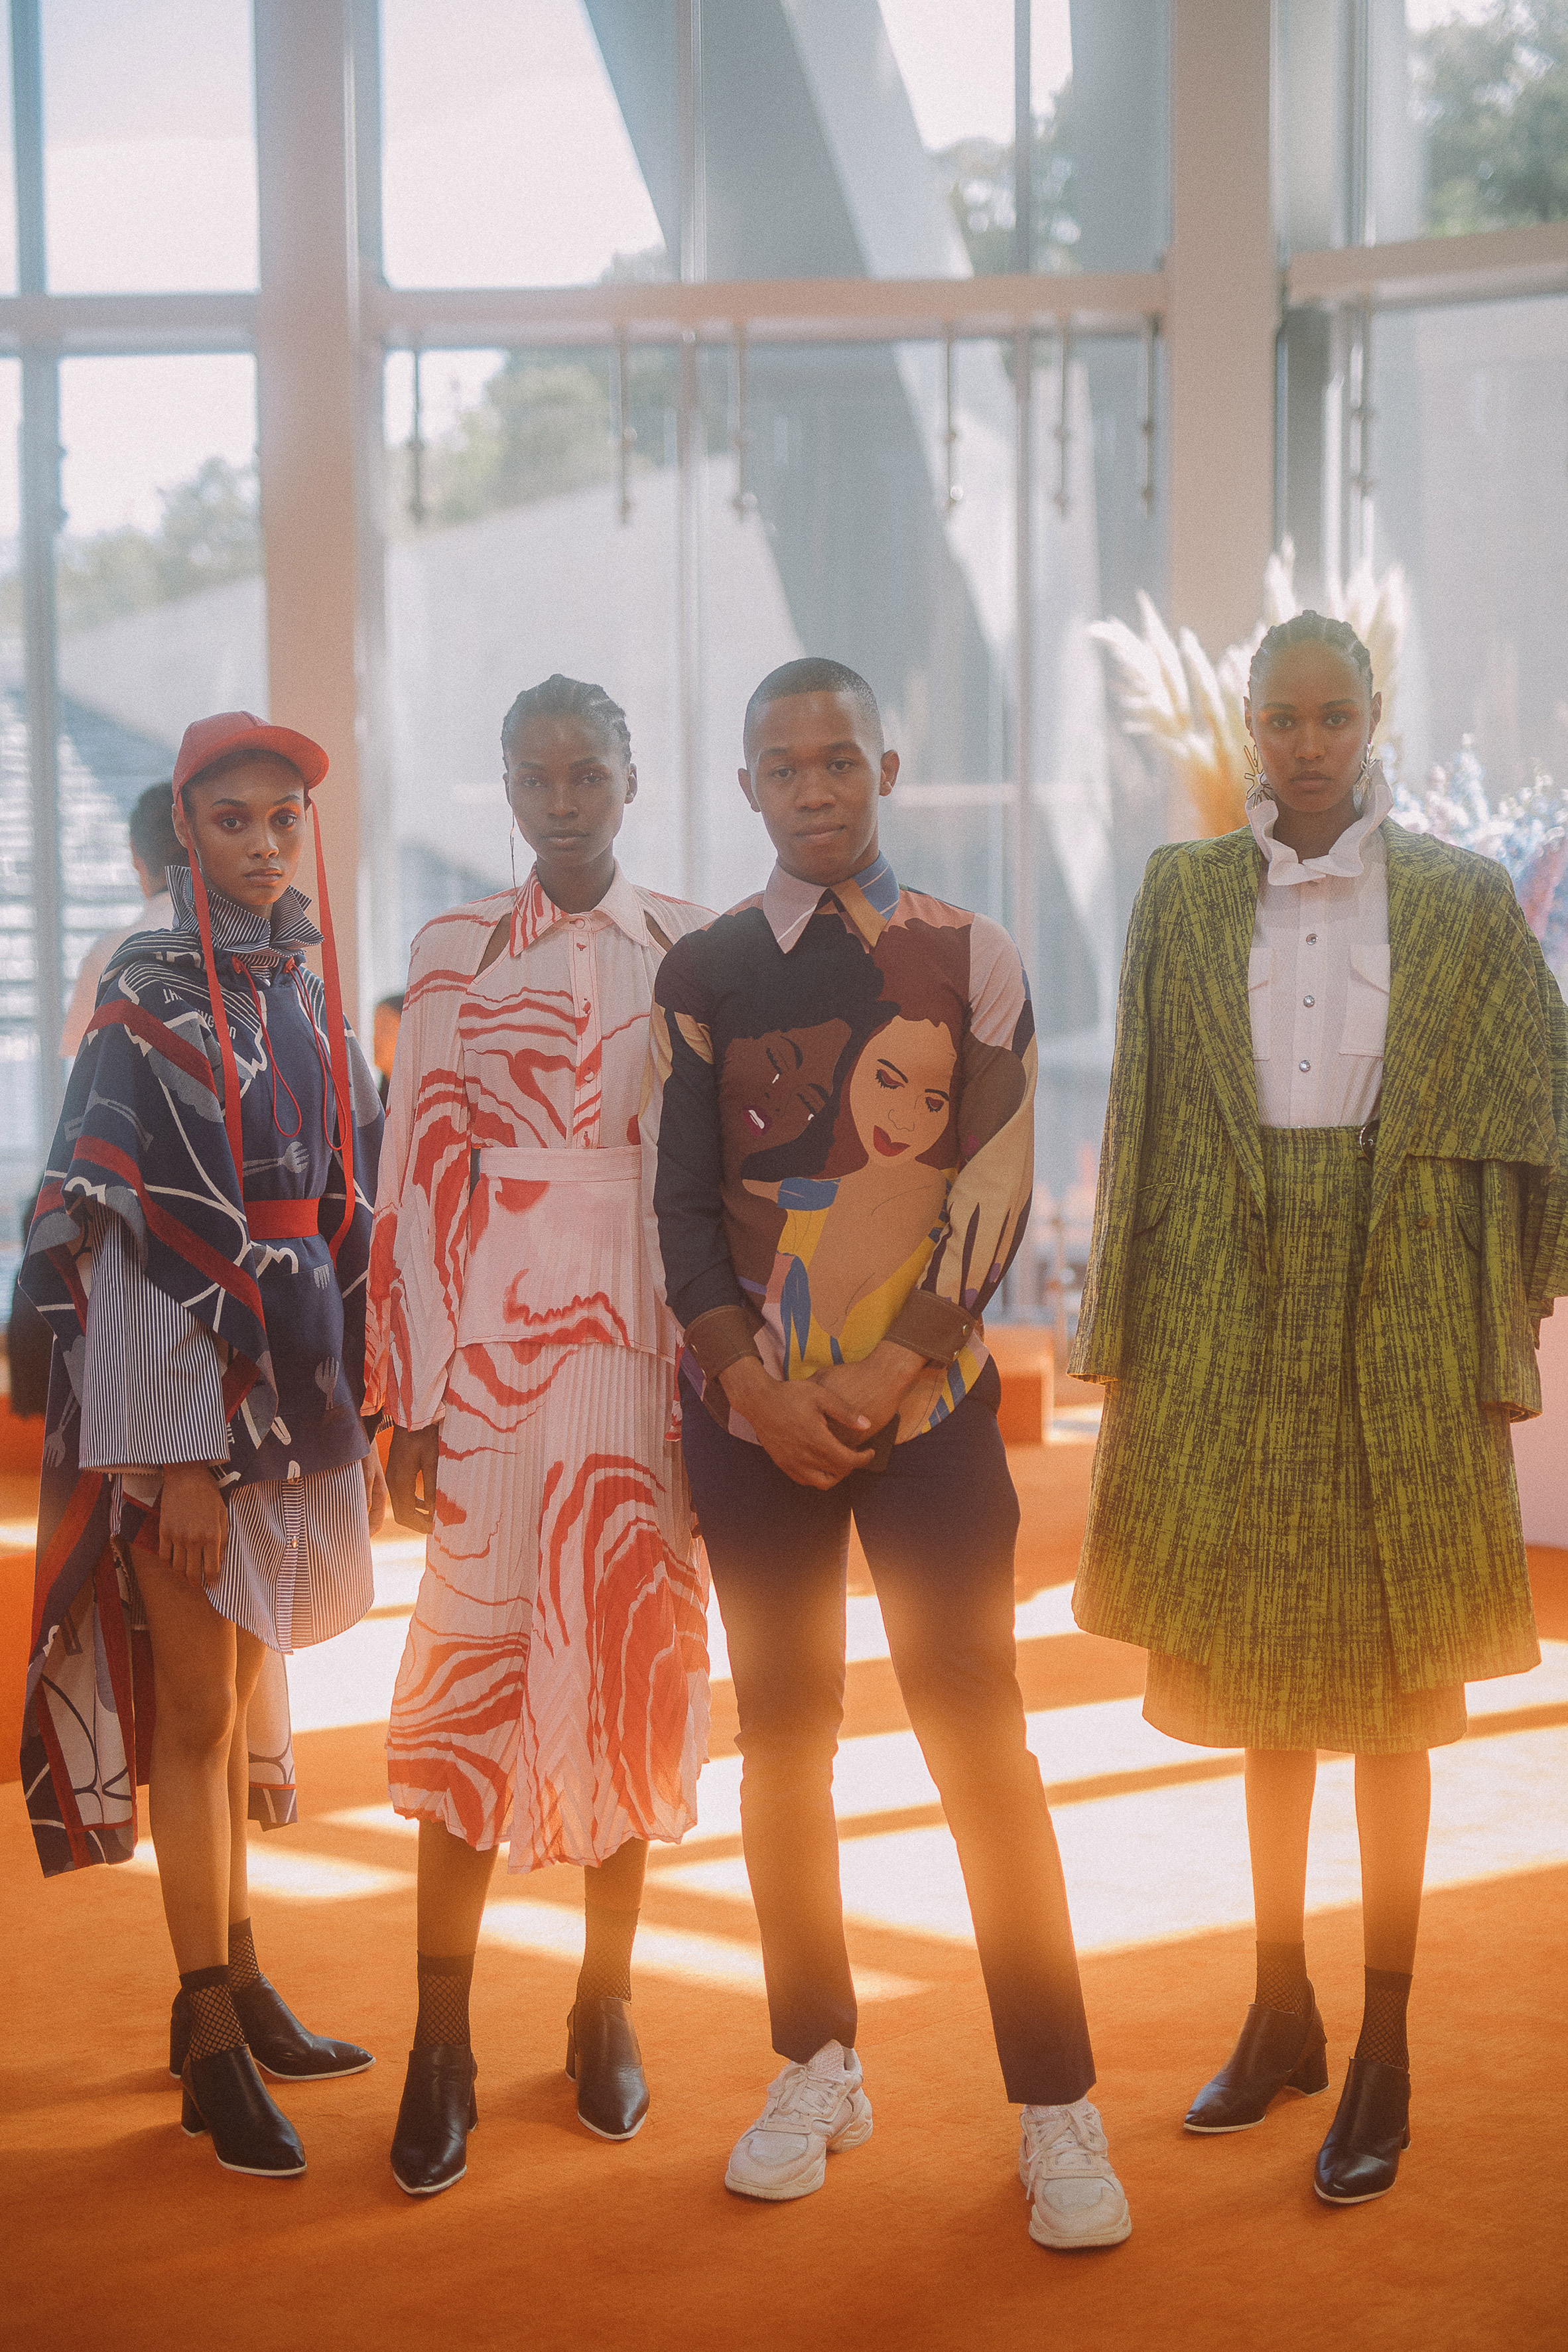 Hed Mayner wins first Karl Lagerfeld Prize for young fashion designers